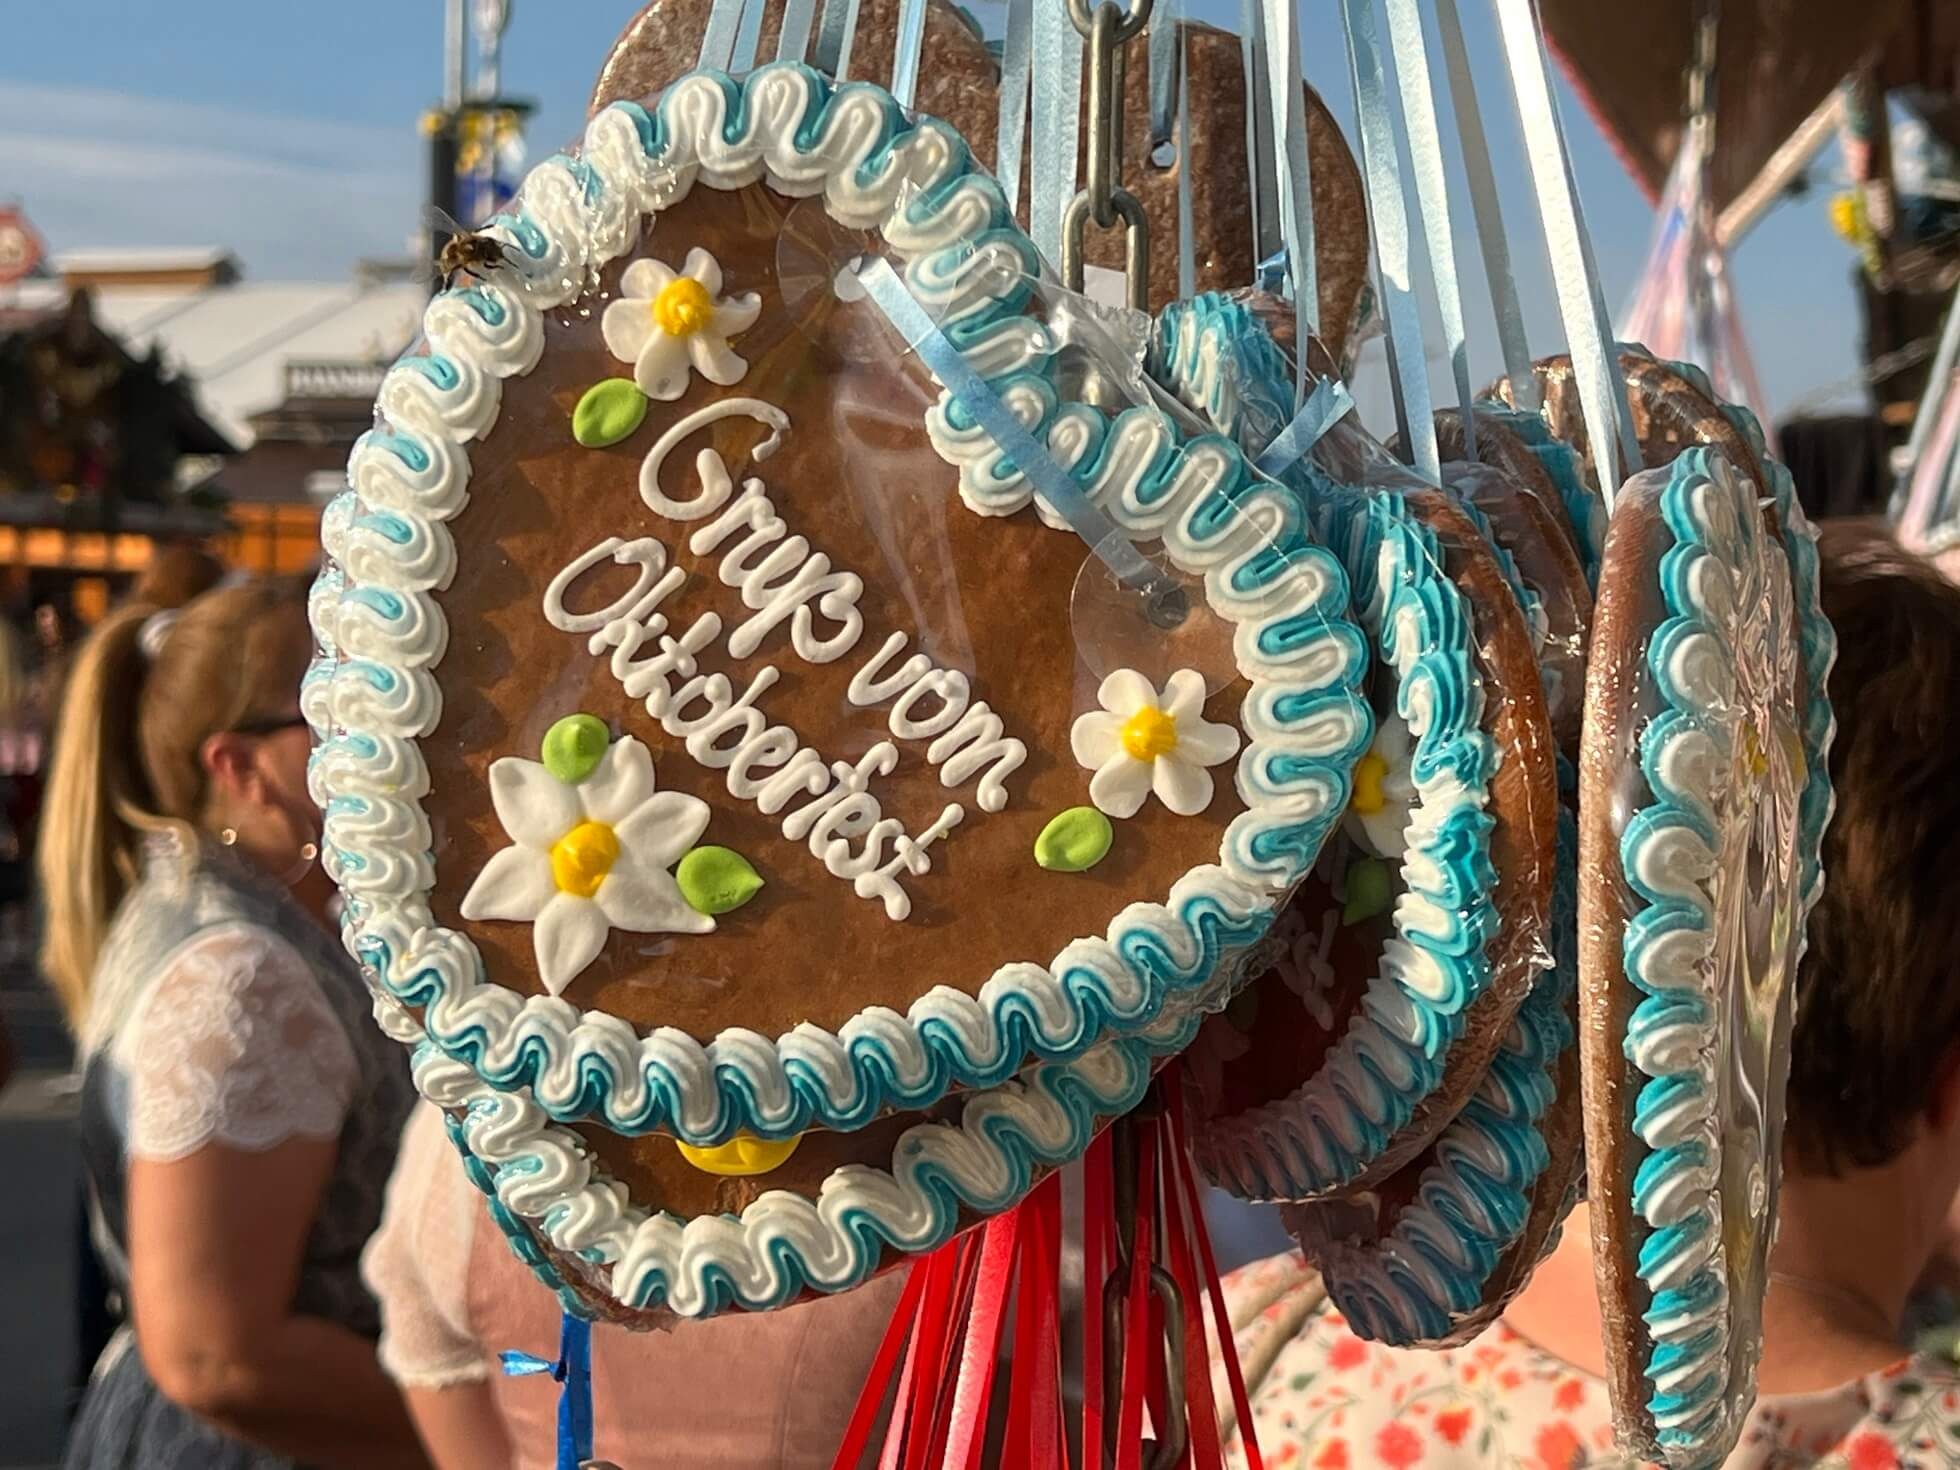 Gingerbreat Hearts at the Octoberfest in Munich